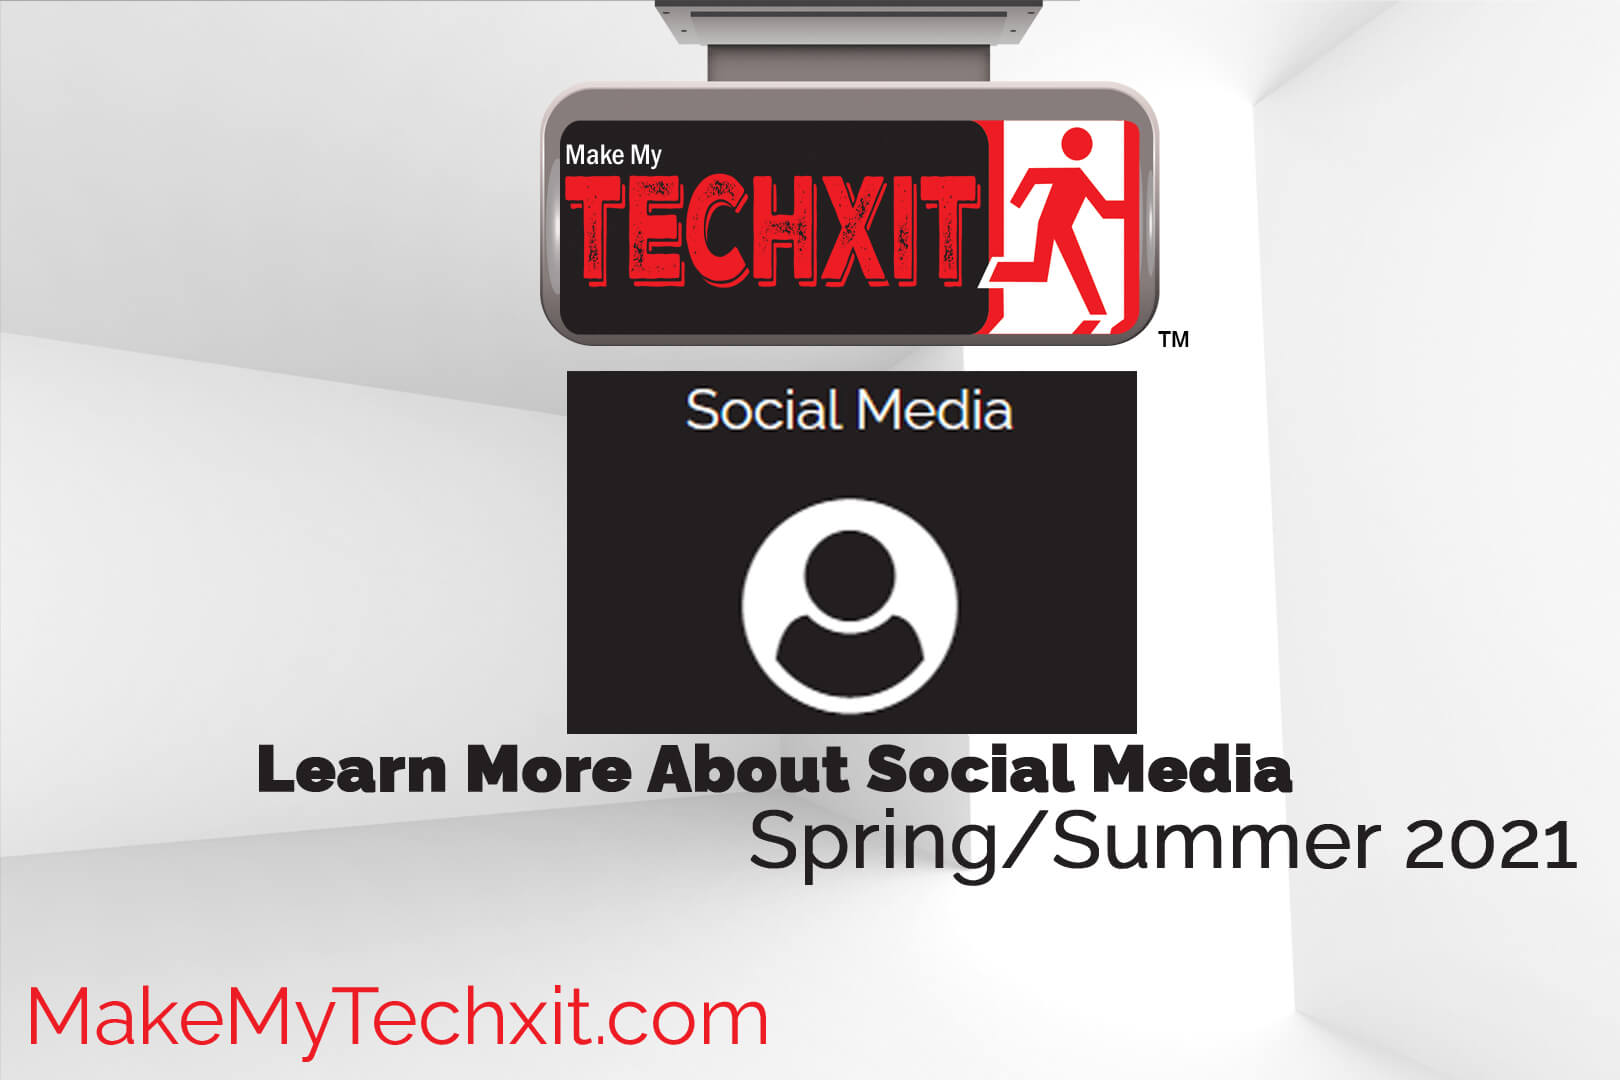 https://www.makemytechxit.com/learn-more-about-social-media.php